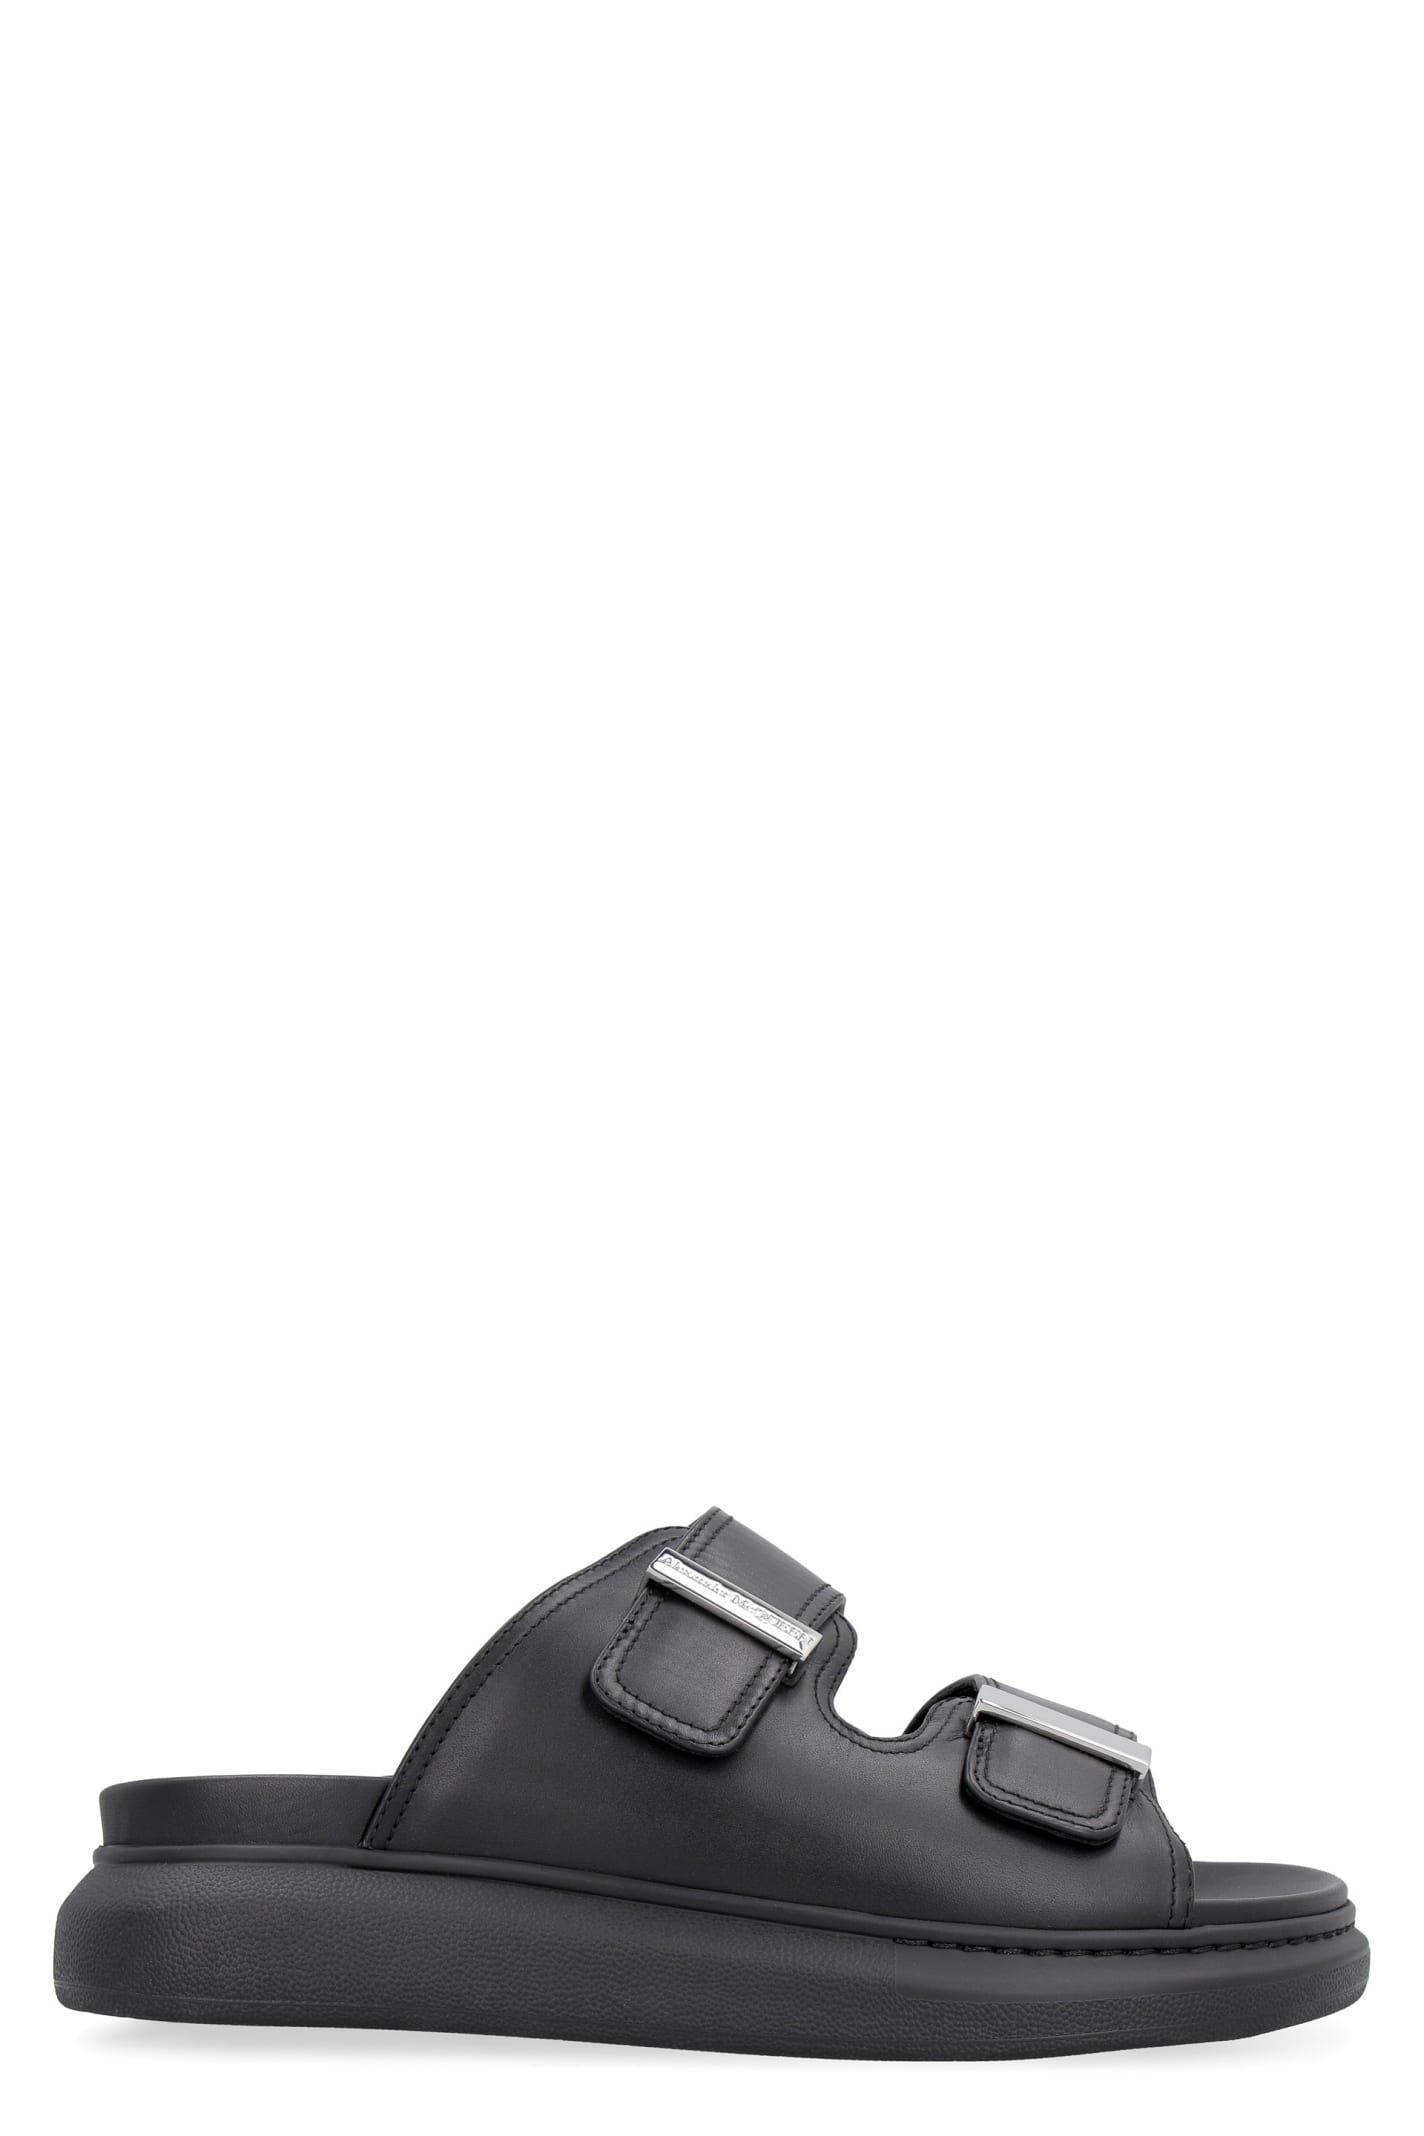 Alexander McQueen Leather Slides With Buckles